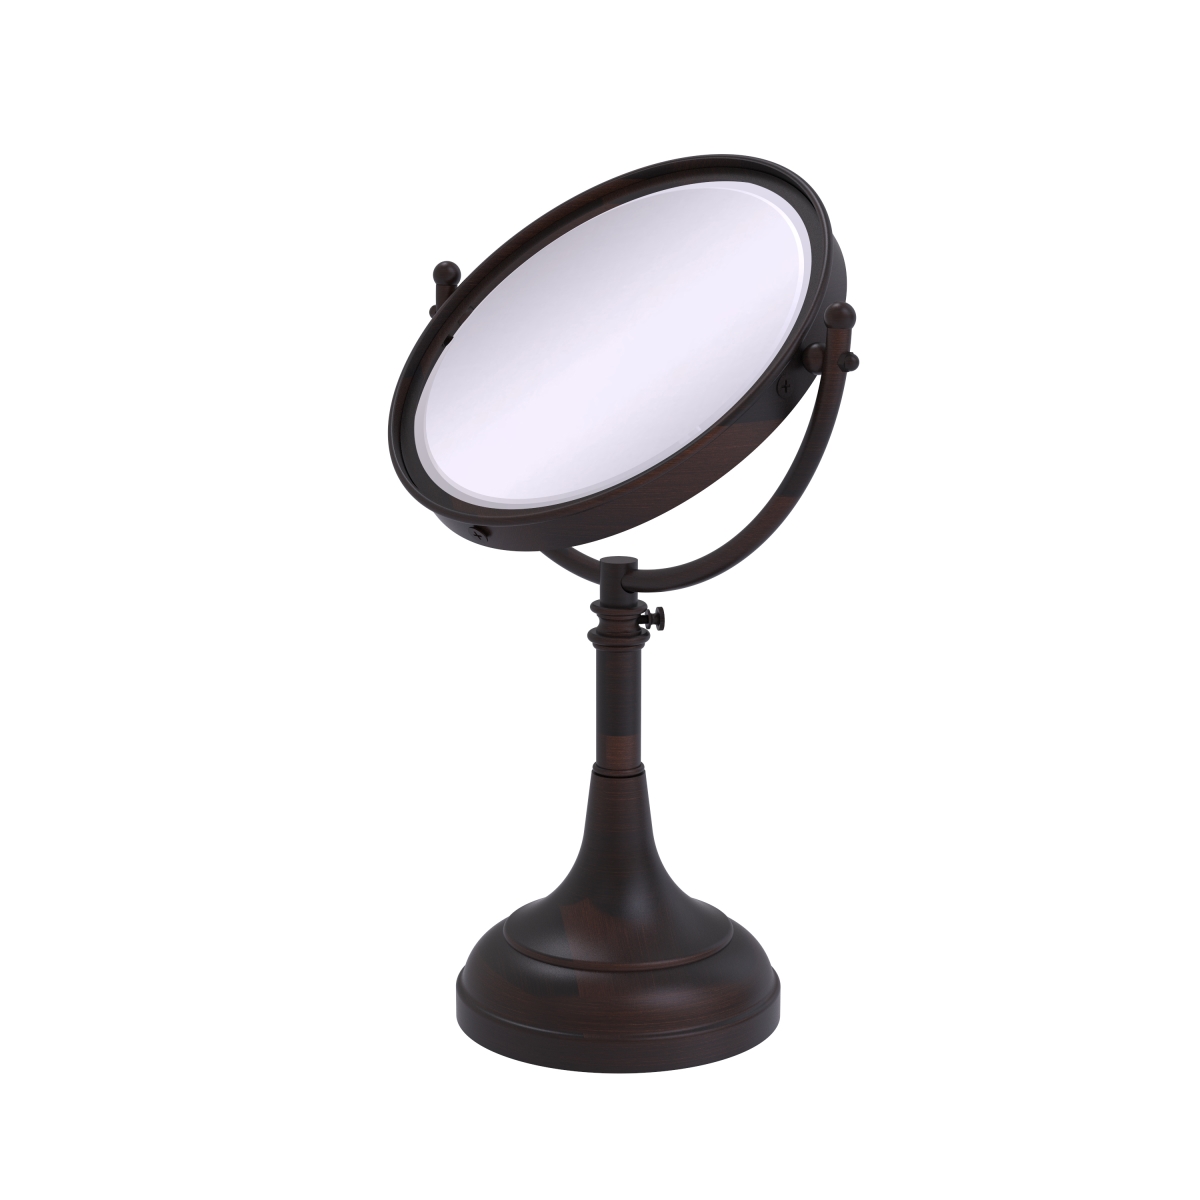 Picture of Allied Brass DM-1-2X-VB 8 in. Height Adjustable Vanity Top Make-Up Mirror 2X Magnification, Venetian Bronze